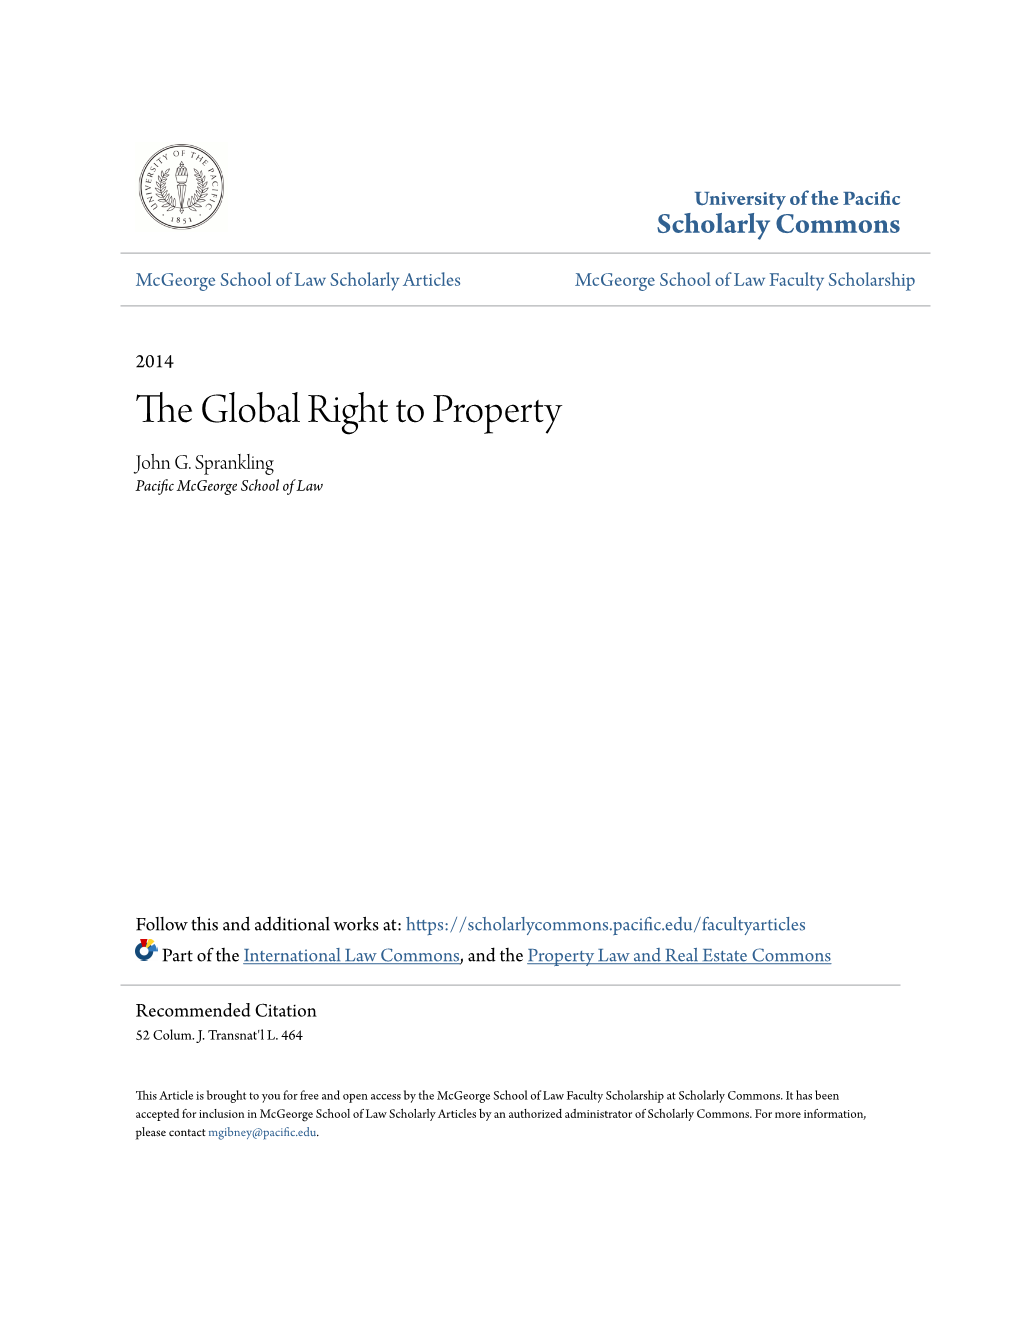 The Global Right to Property John G